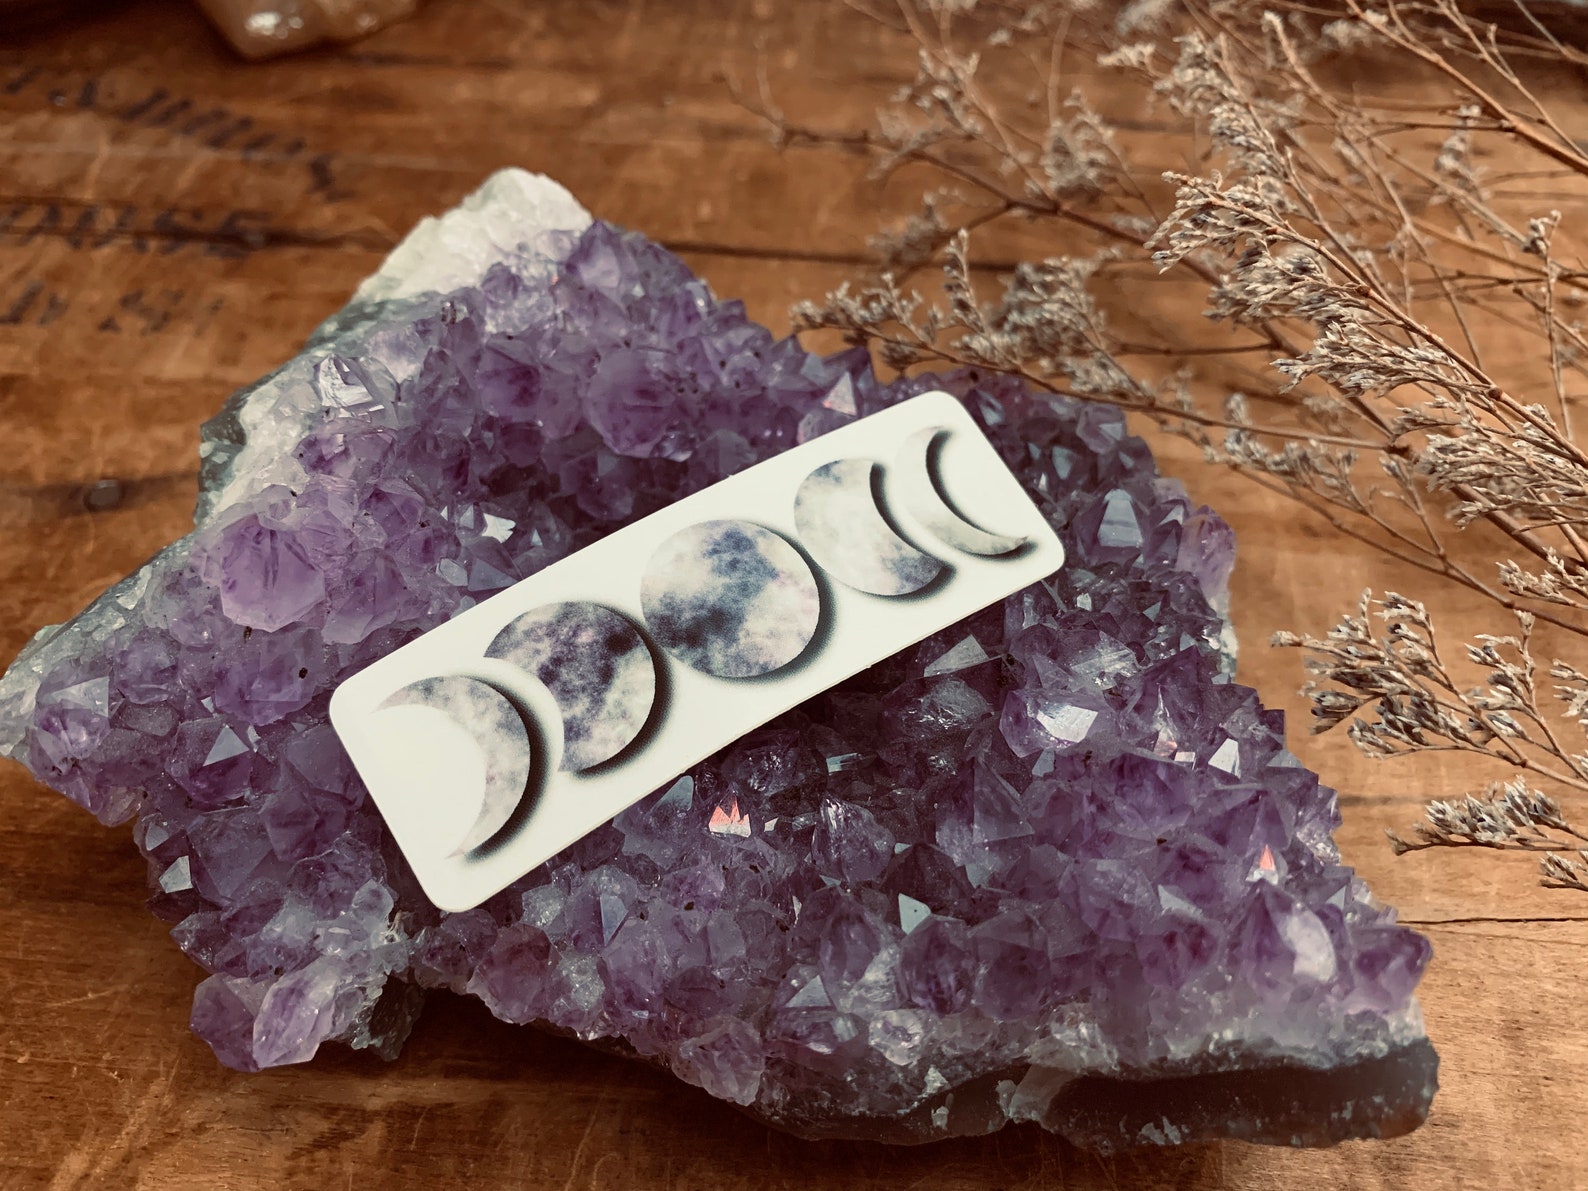 Purple Moon Phases sticker resting on an Amethyst cluster.